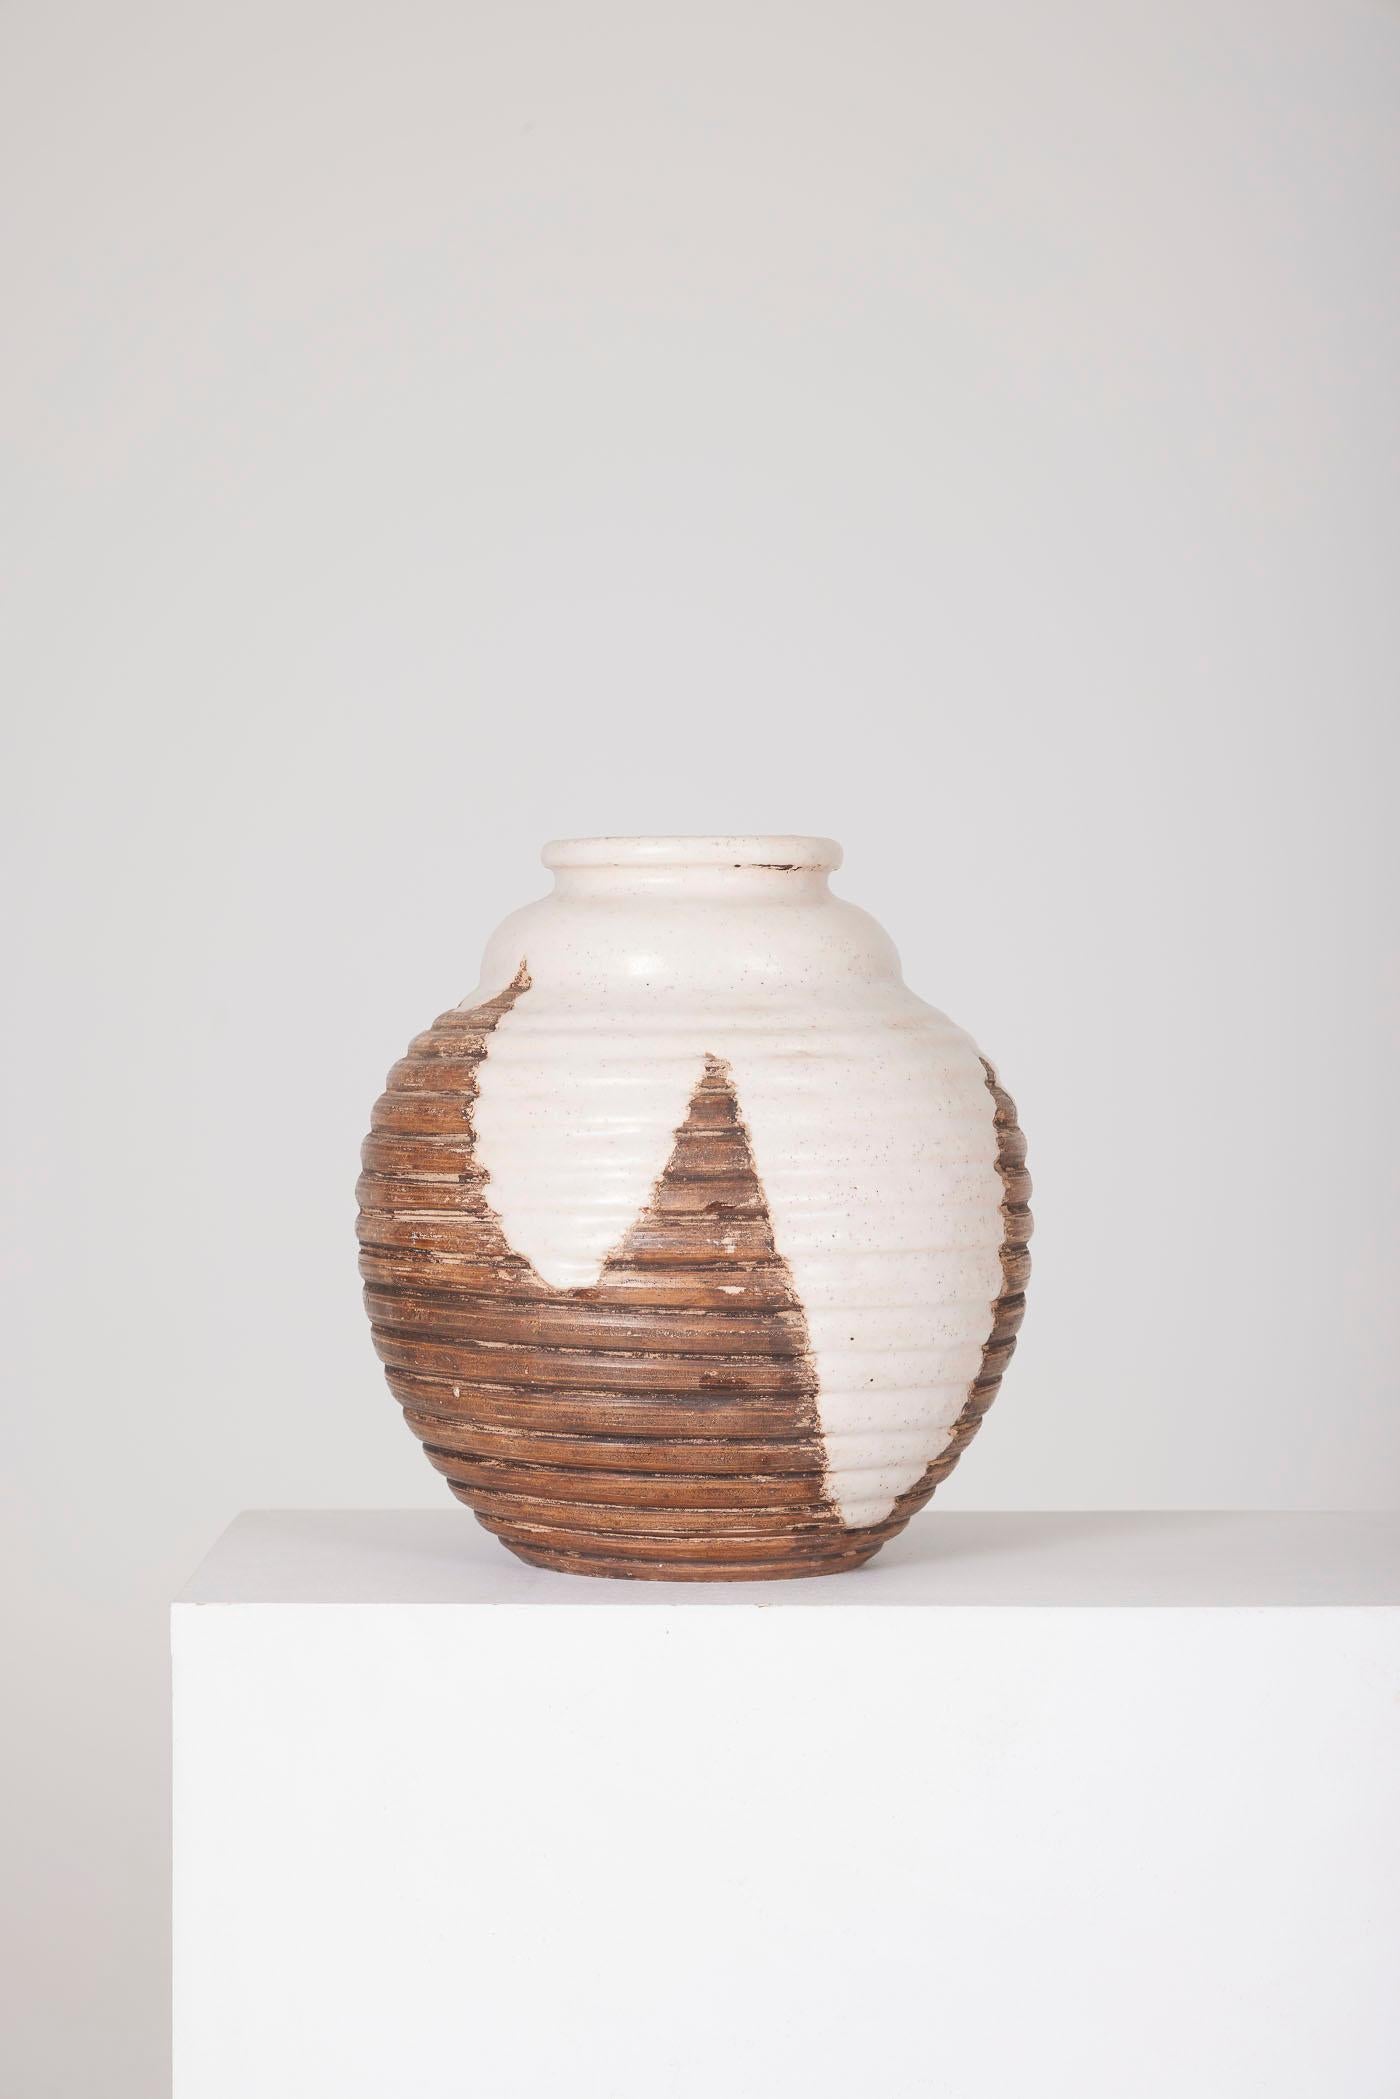 Large spherical vase by the French ceramicist Louis Dage, 1930s. It is glazed in beige and brown. In perfect condition.
DV500